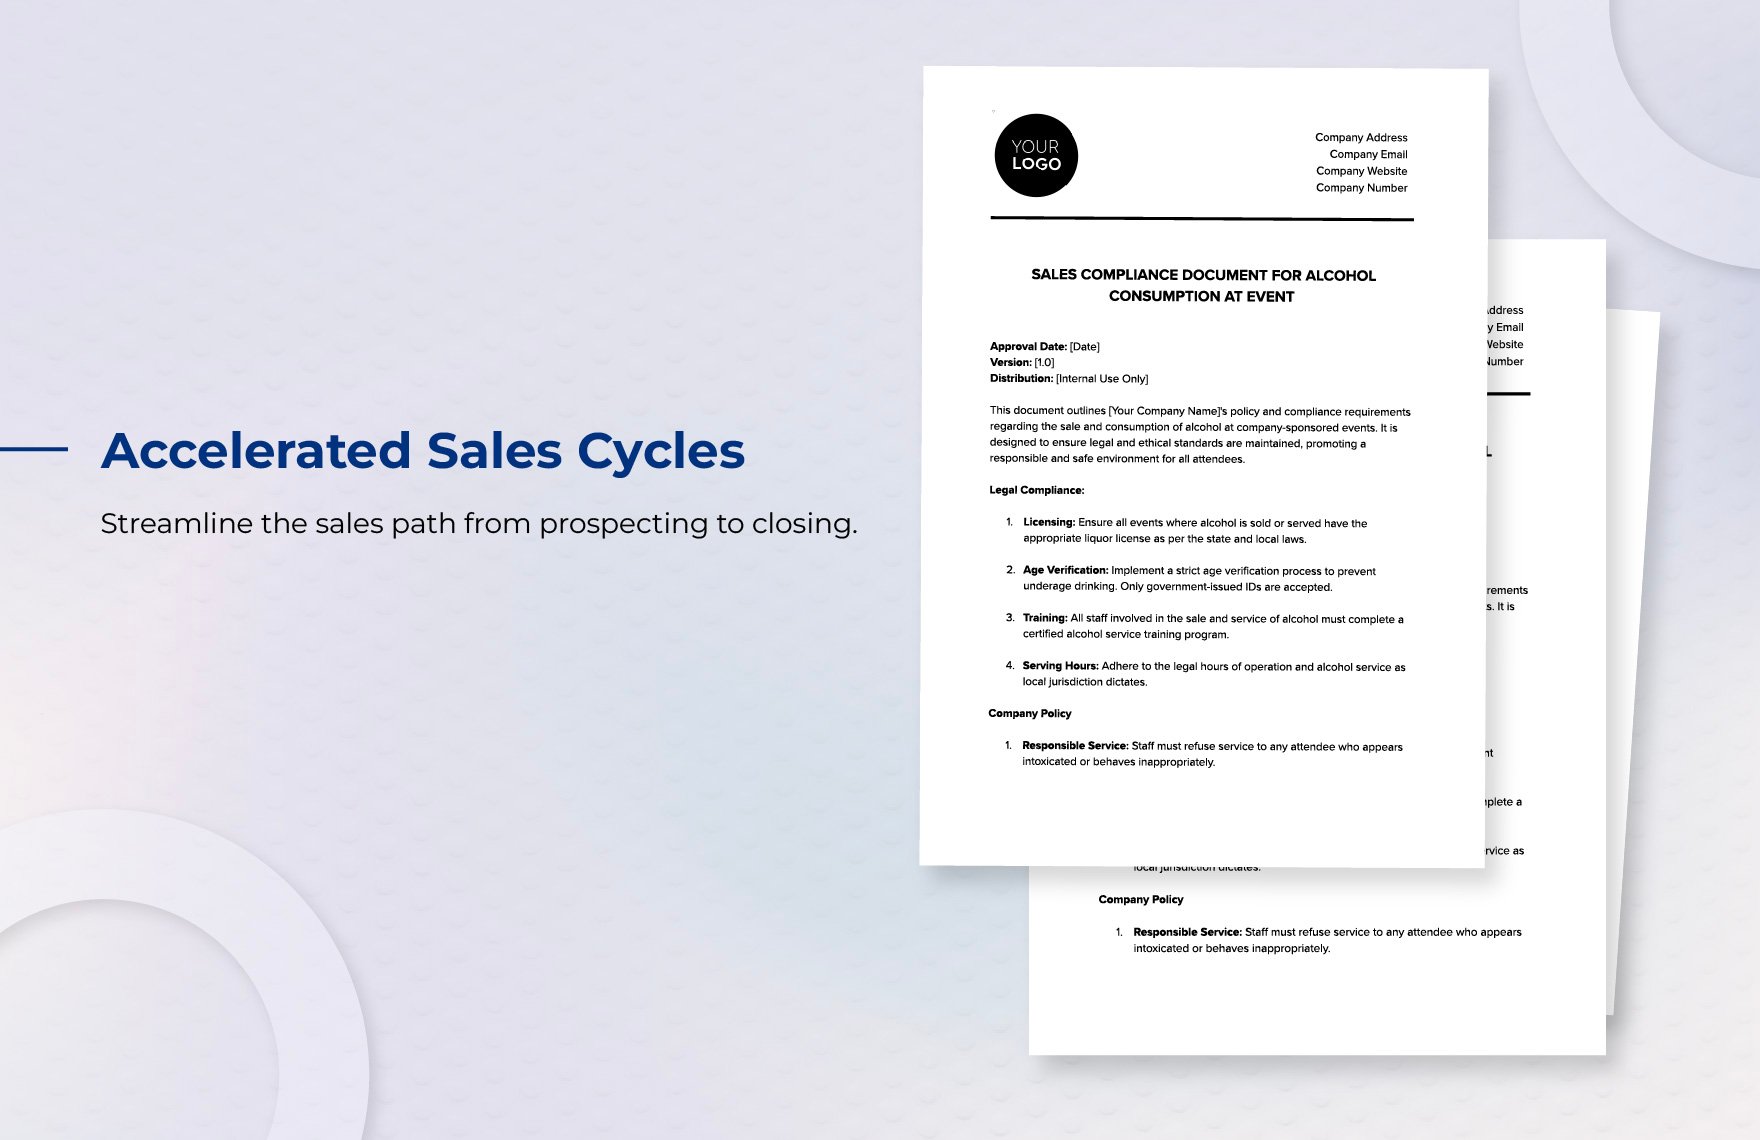 Sales Compliance Document for Alcohol Consumption at Event Template